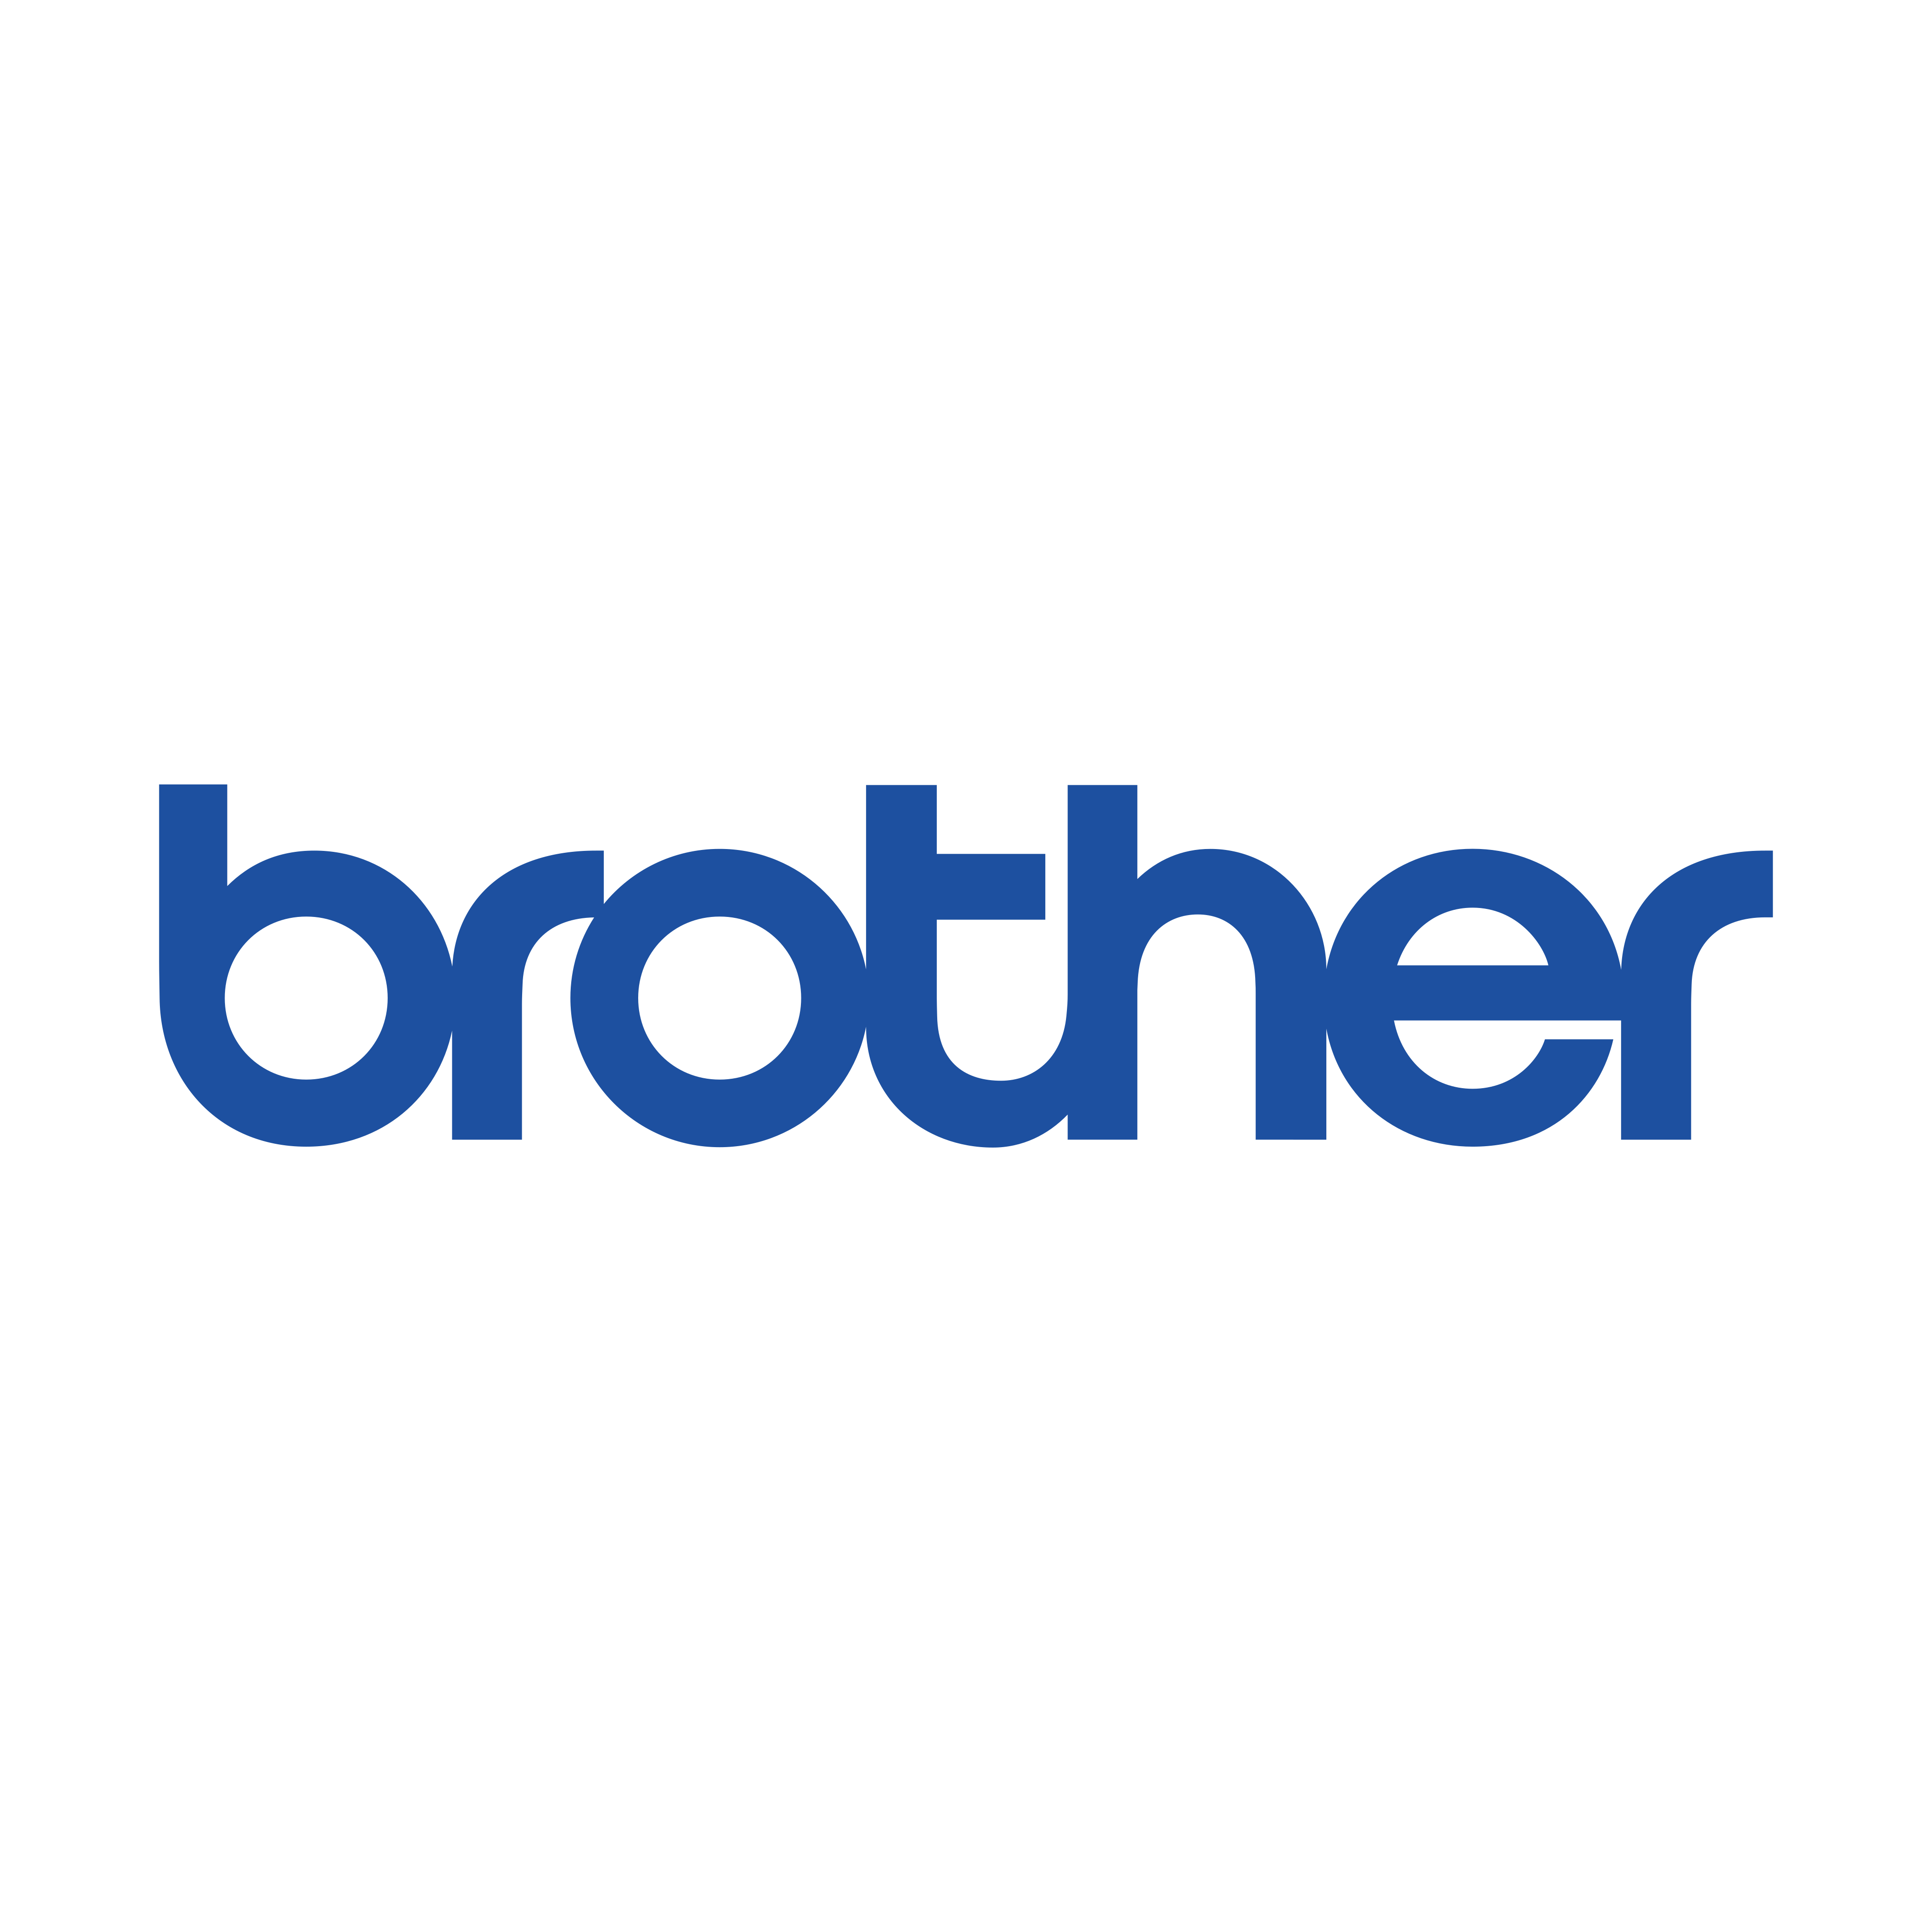 brother logo 0 - Brother Logo